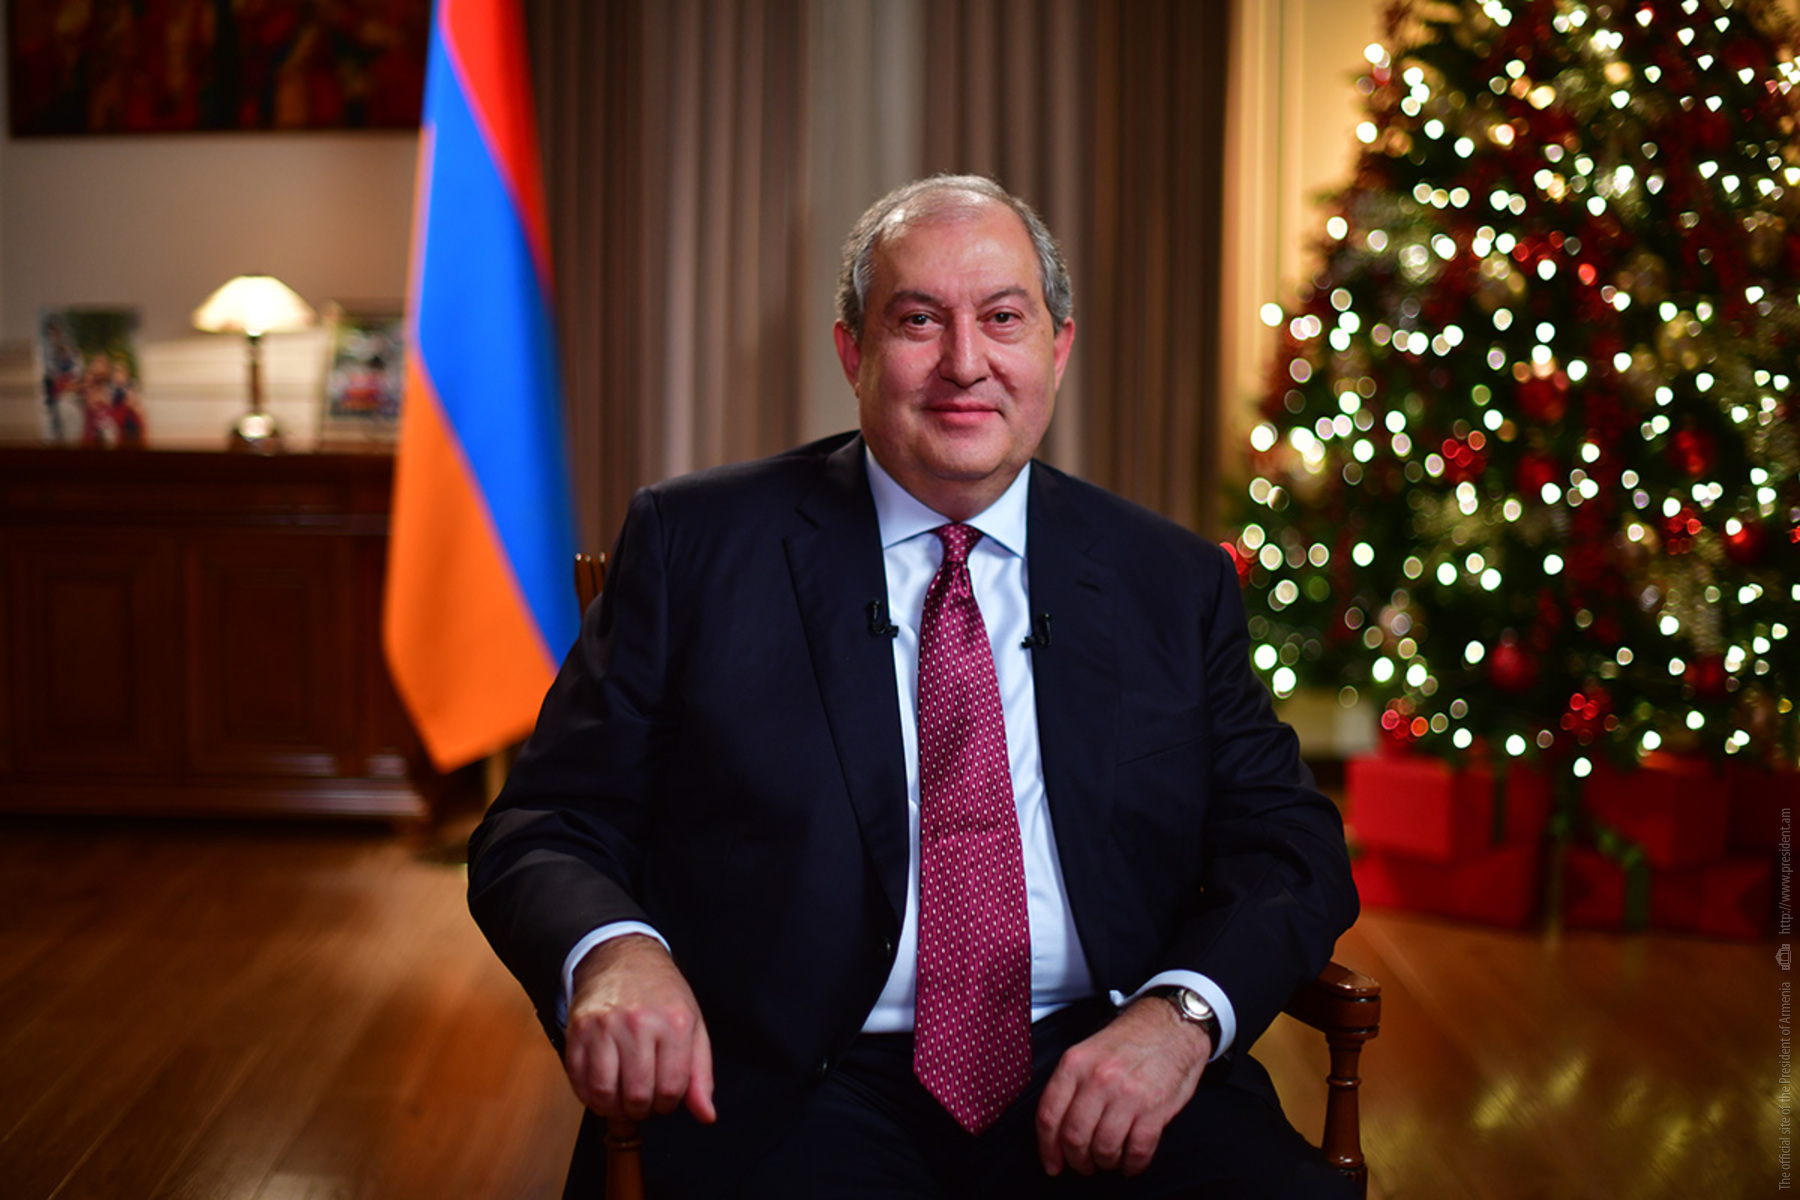 President Armen Sarkissian sent a congratulatory message on the occasion of New Year and Holy Christmas